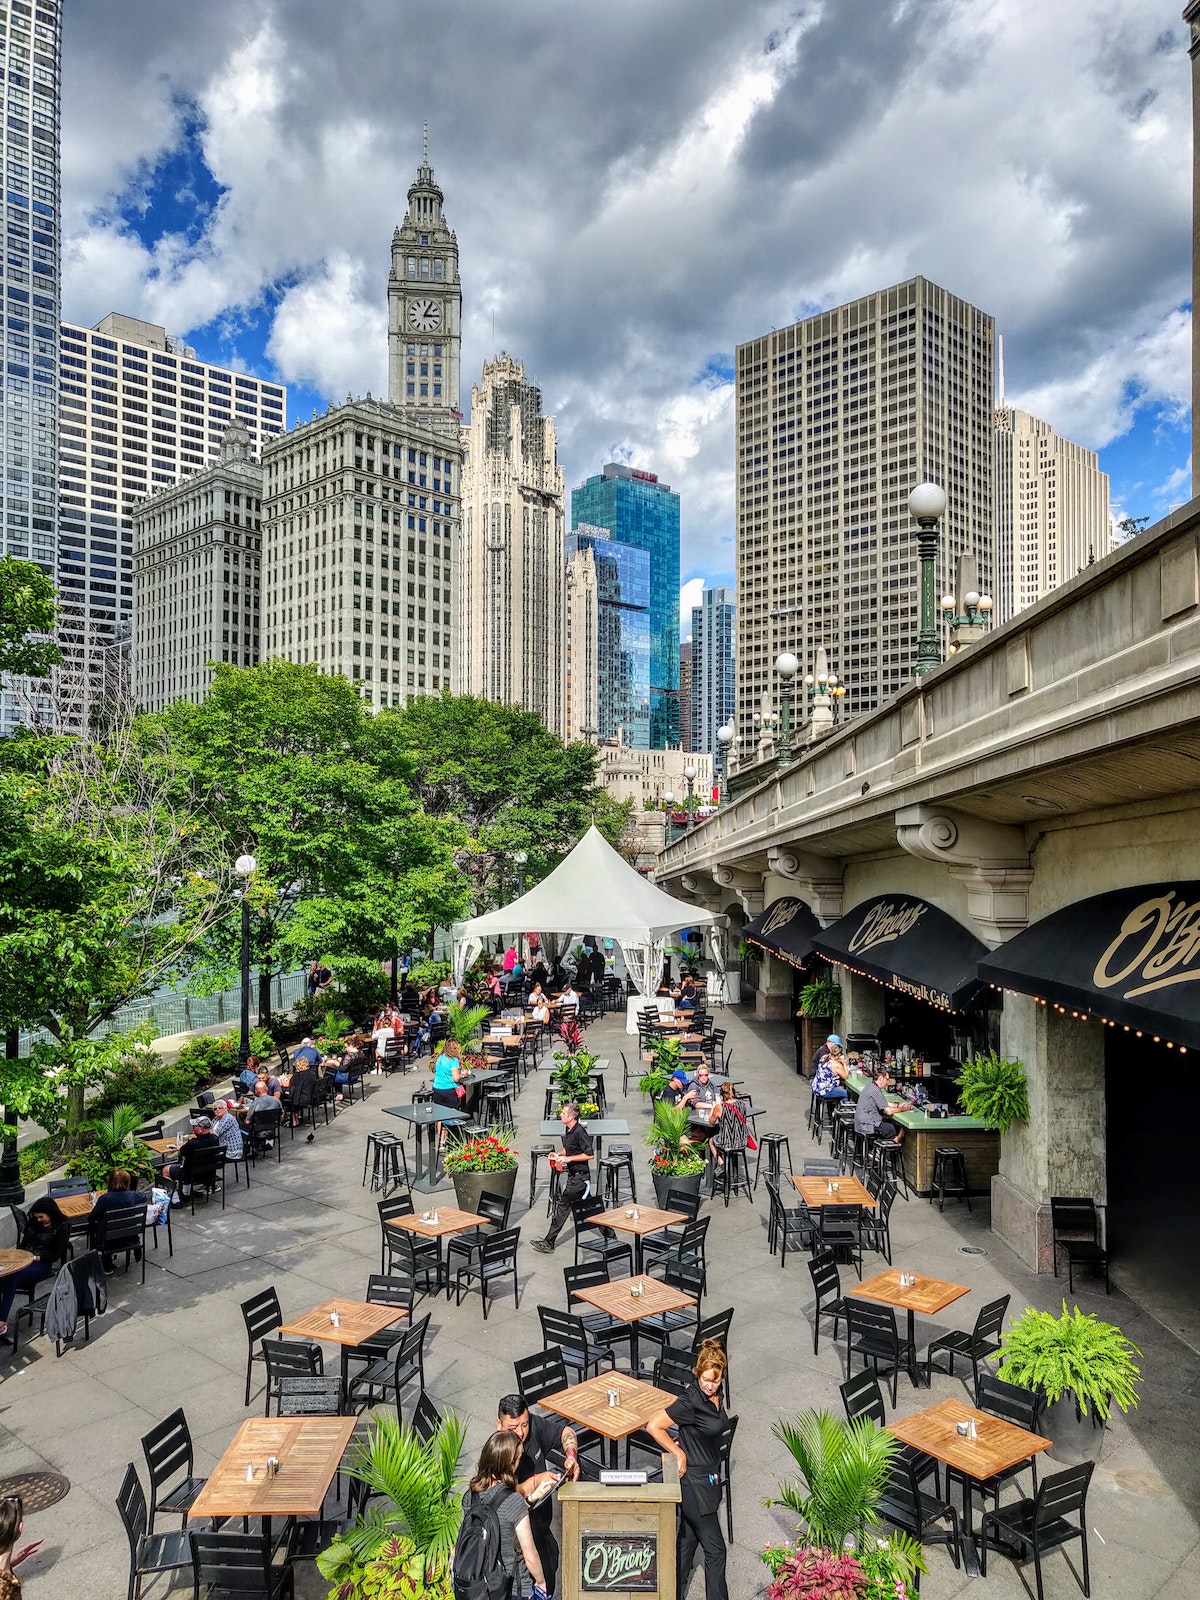 A view of Chicago loop with a restaurant with outdoor seating in the bottom foreground and the city skyline in the background. There are over 7,000 places to eat in Chicago.